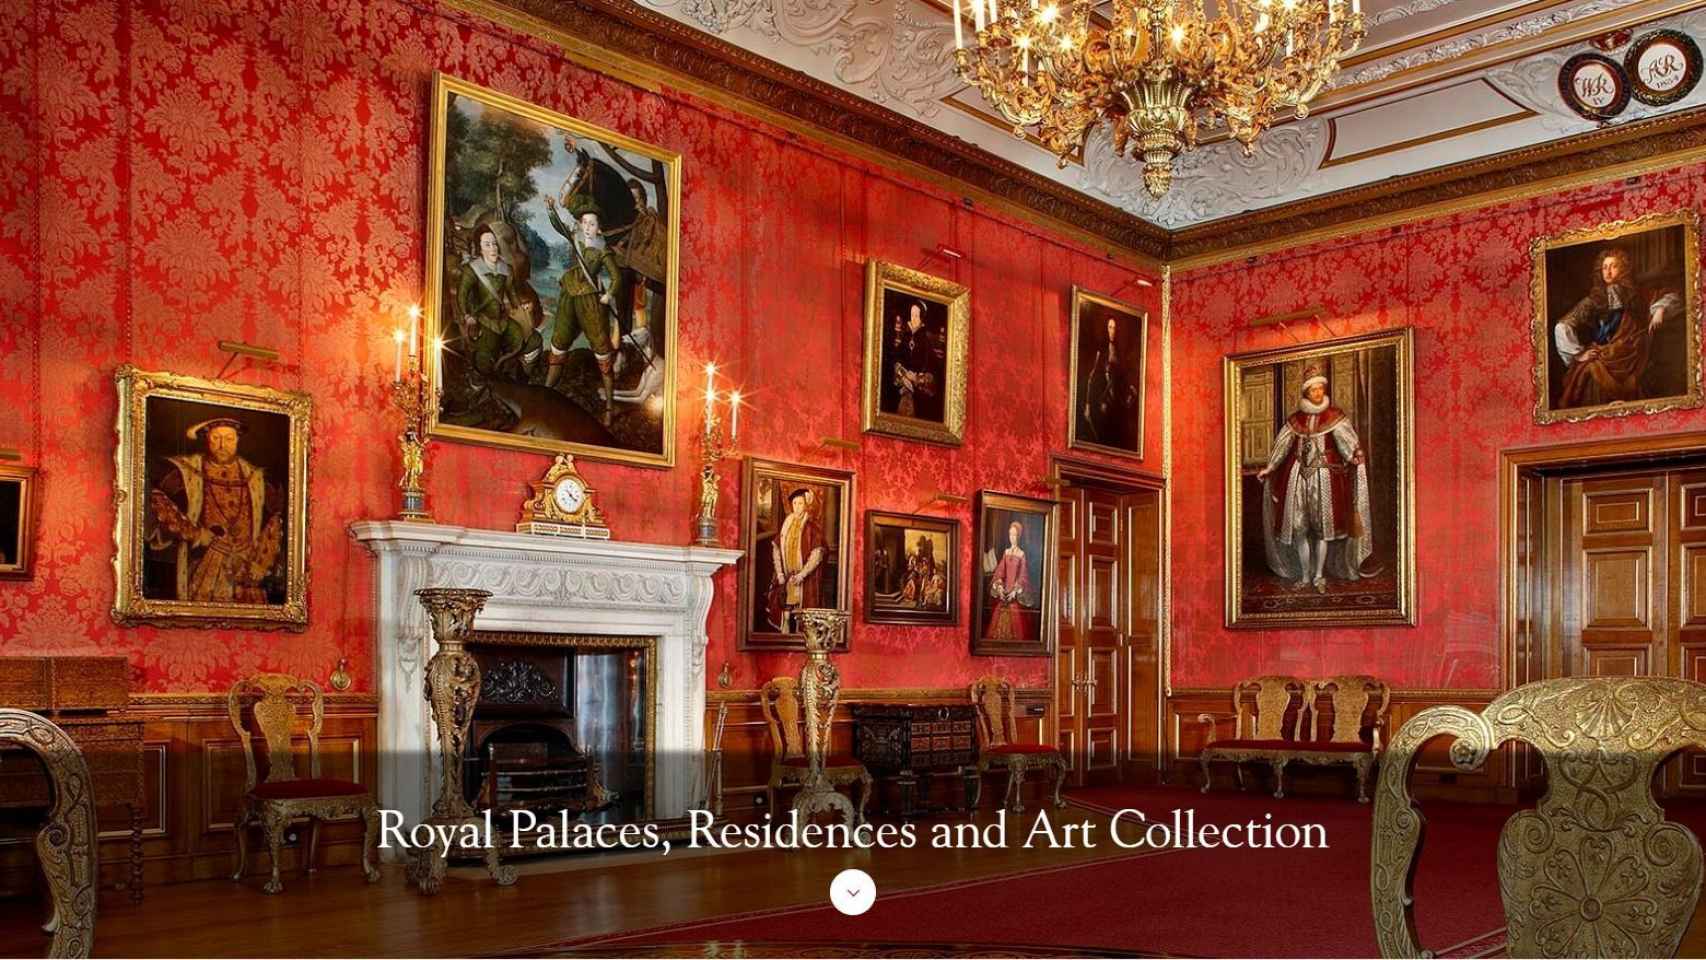 Royal Palaces, Residences and Art Collection.